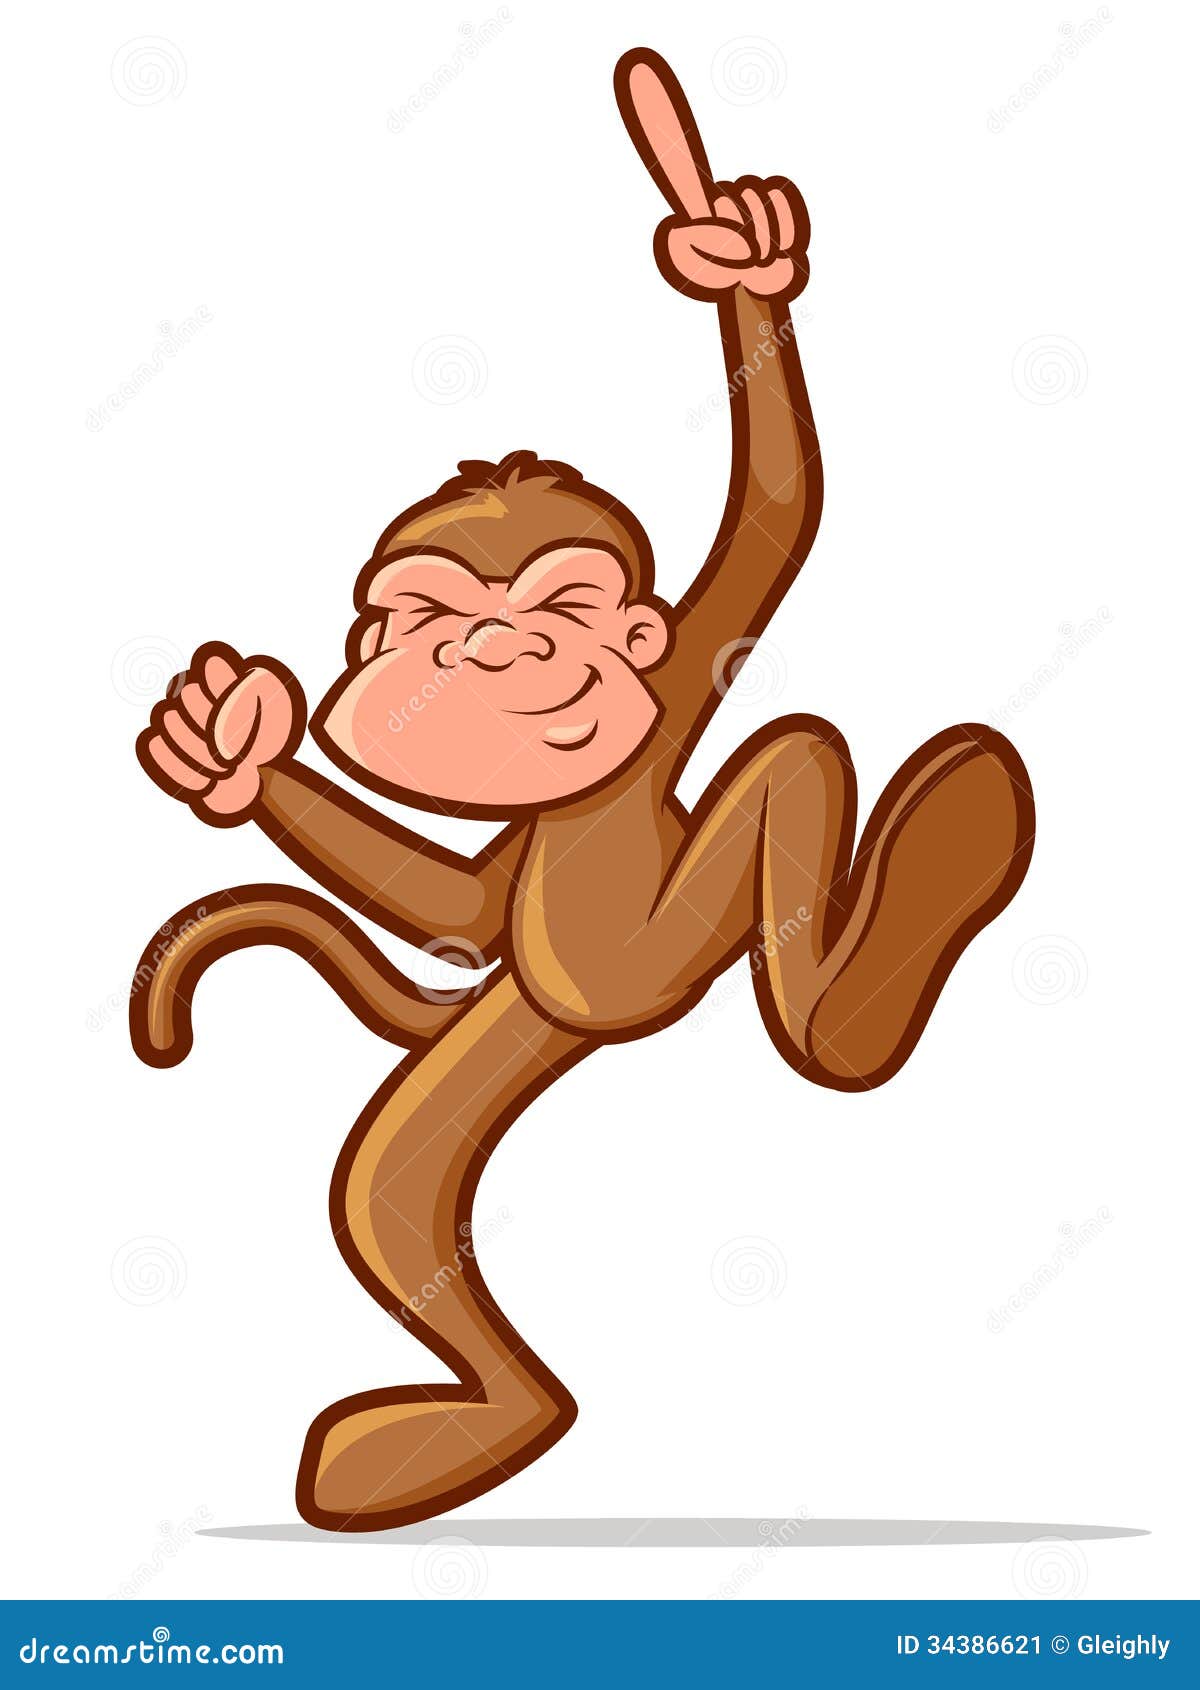 funny dancing clipart - photo #33